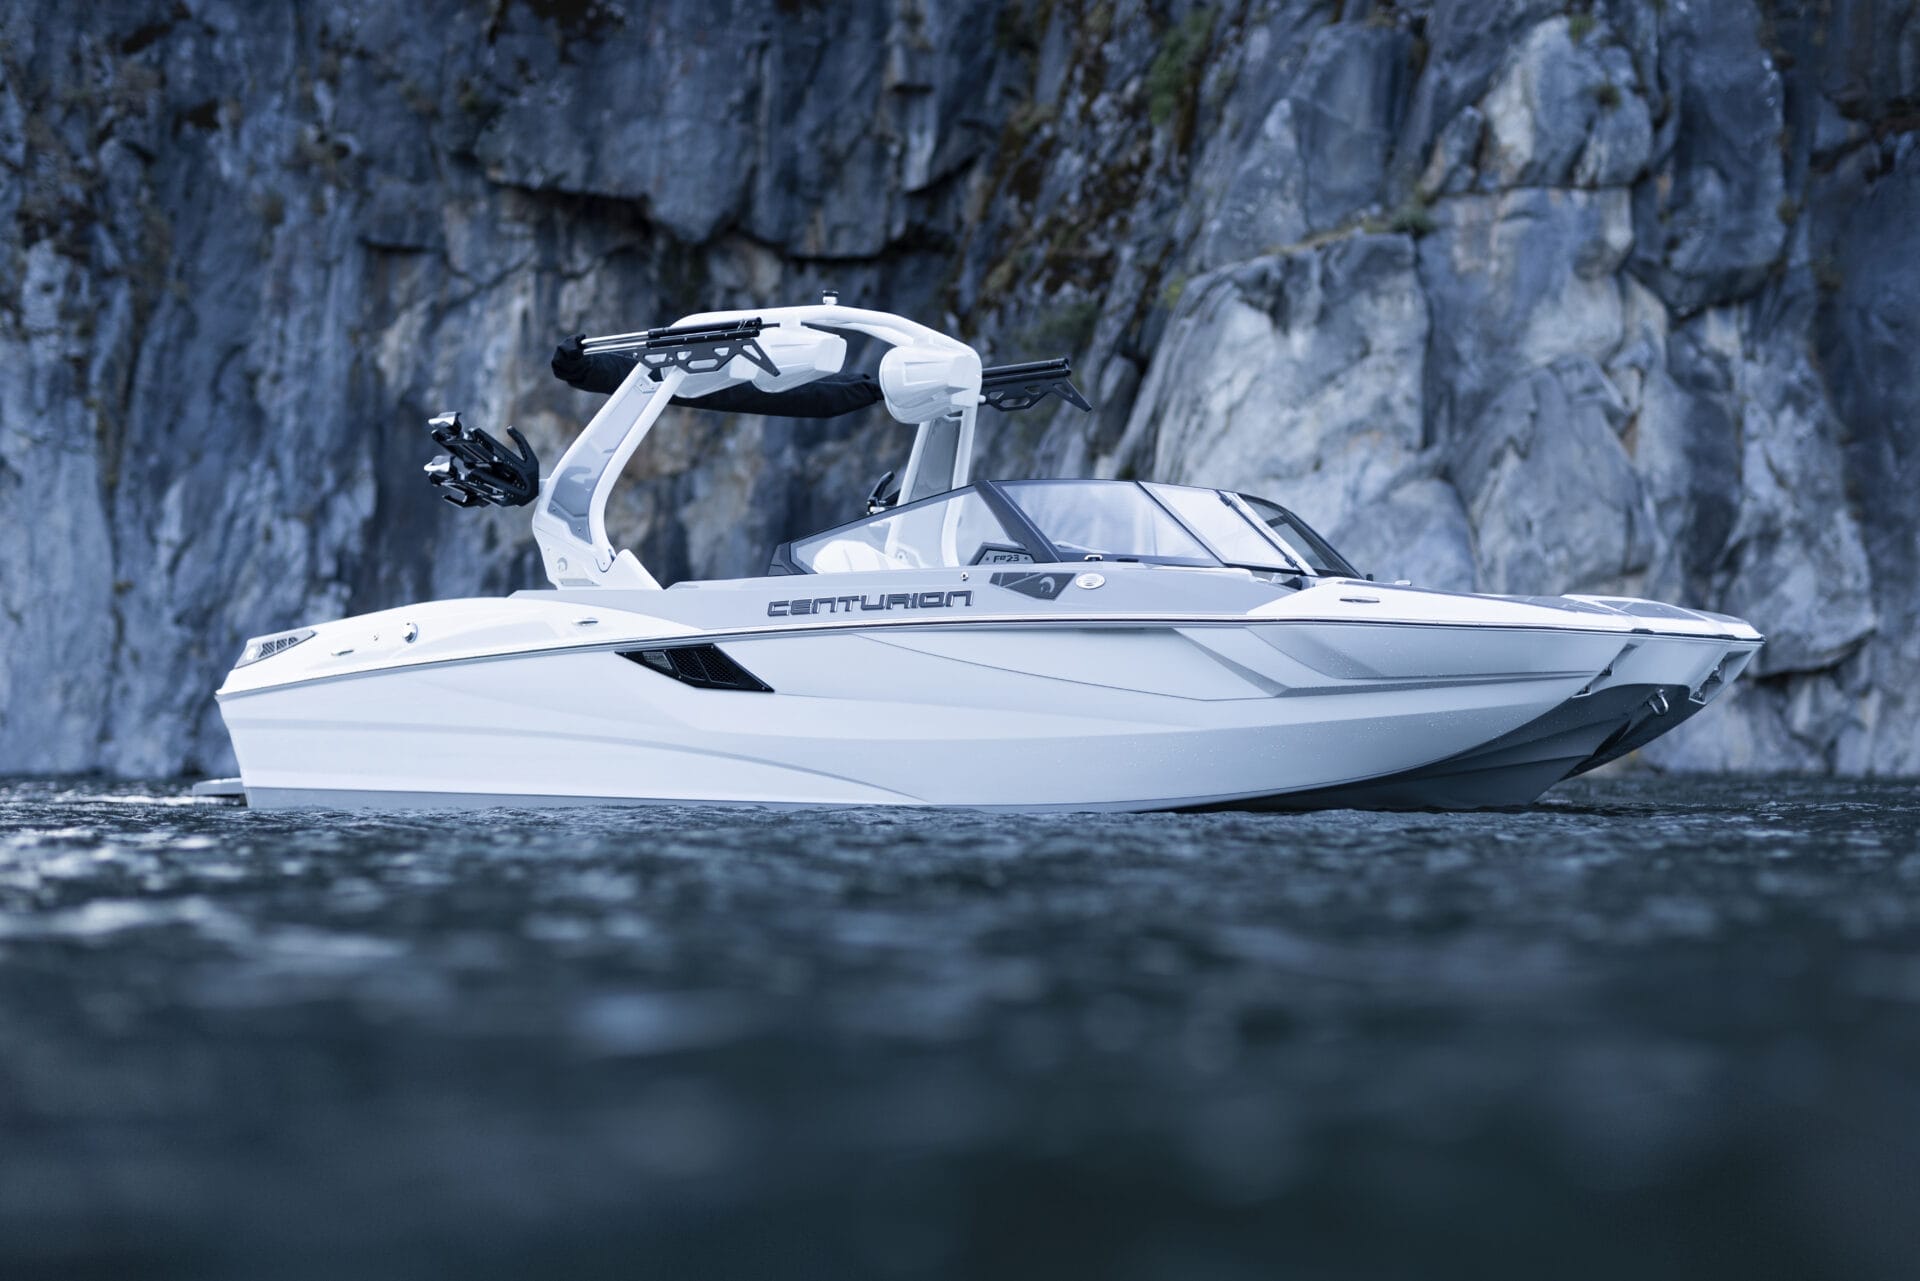 A white Centurion boat floating on water with a rocky cliff in the background.